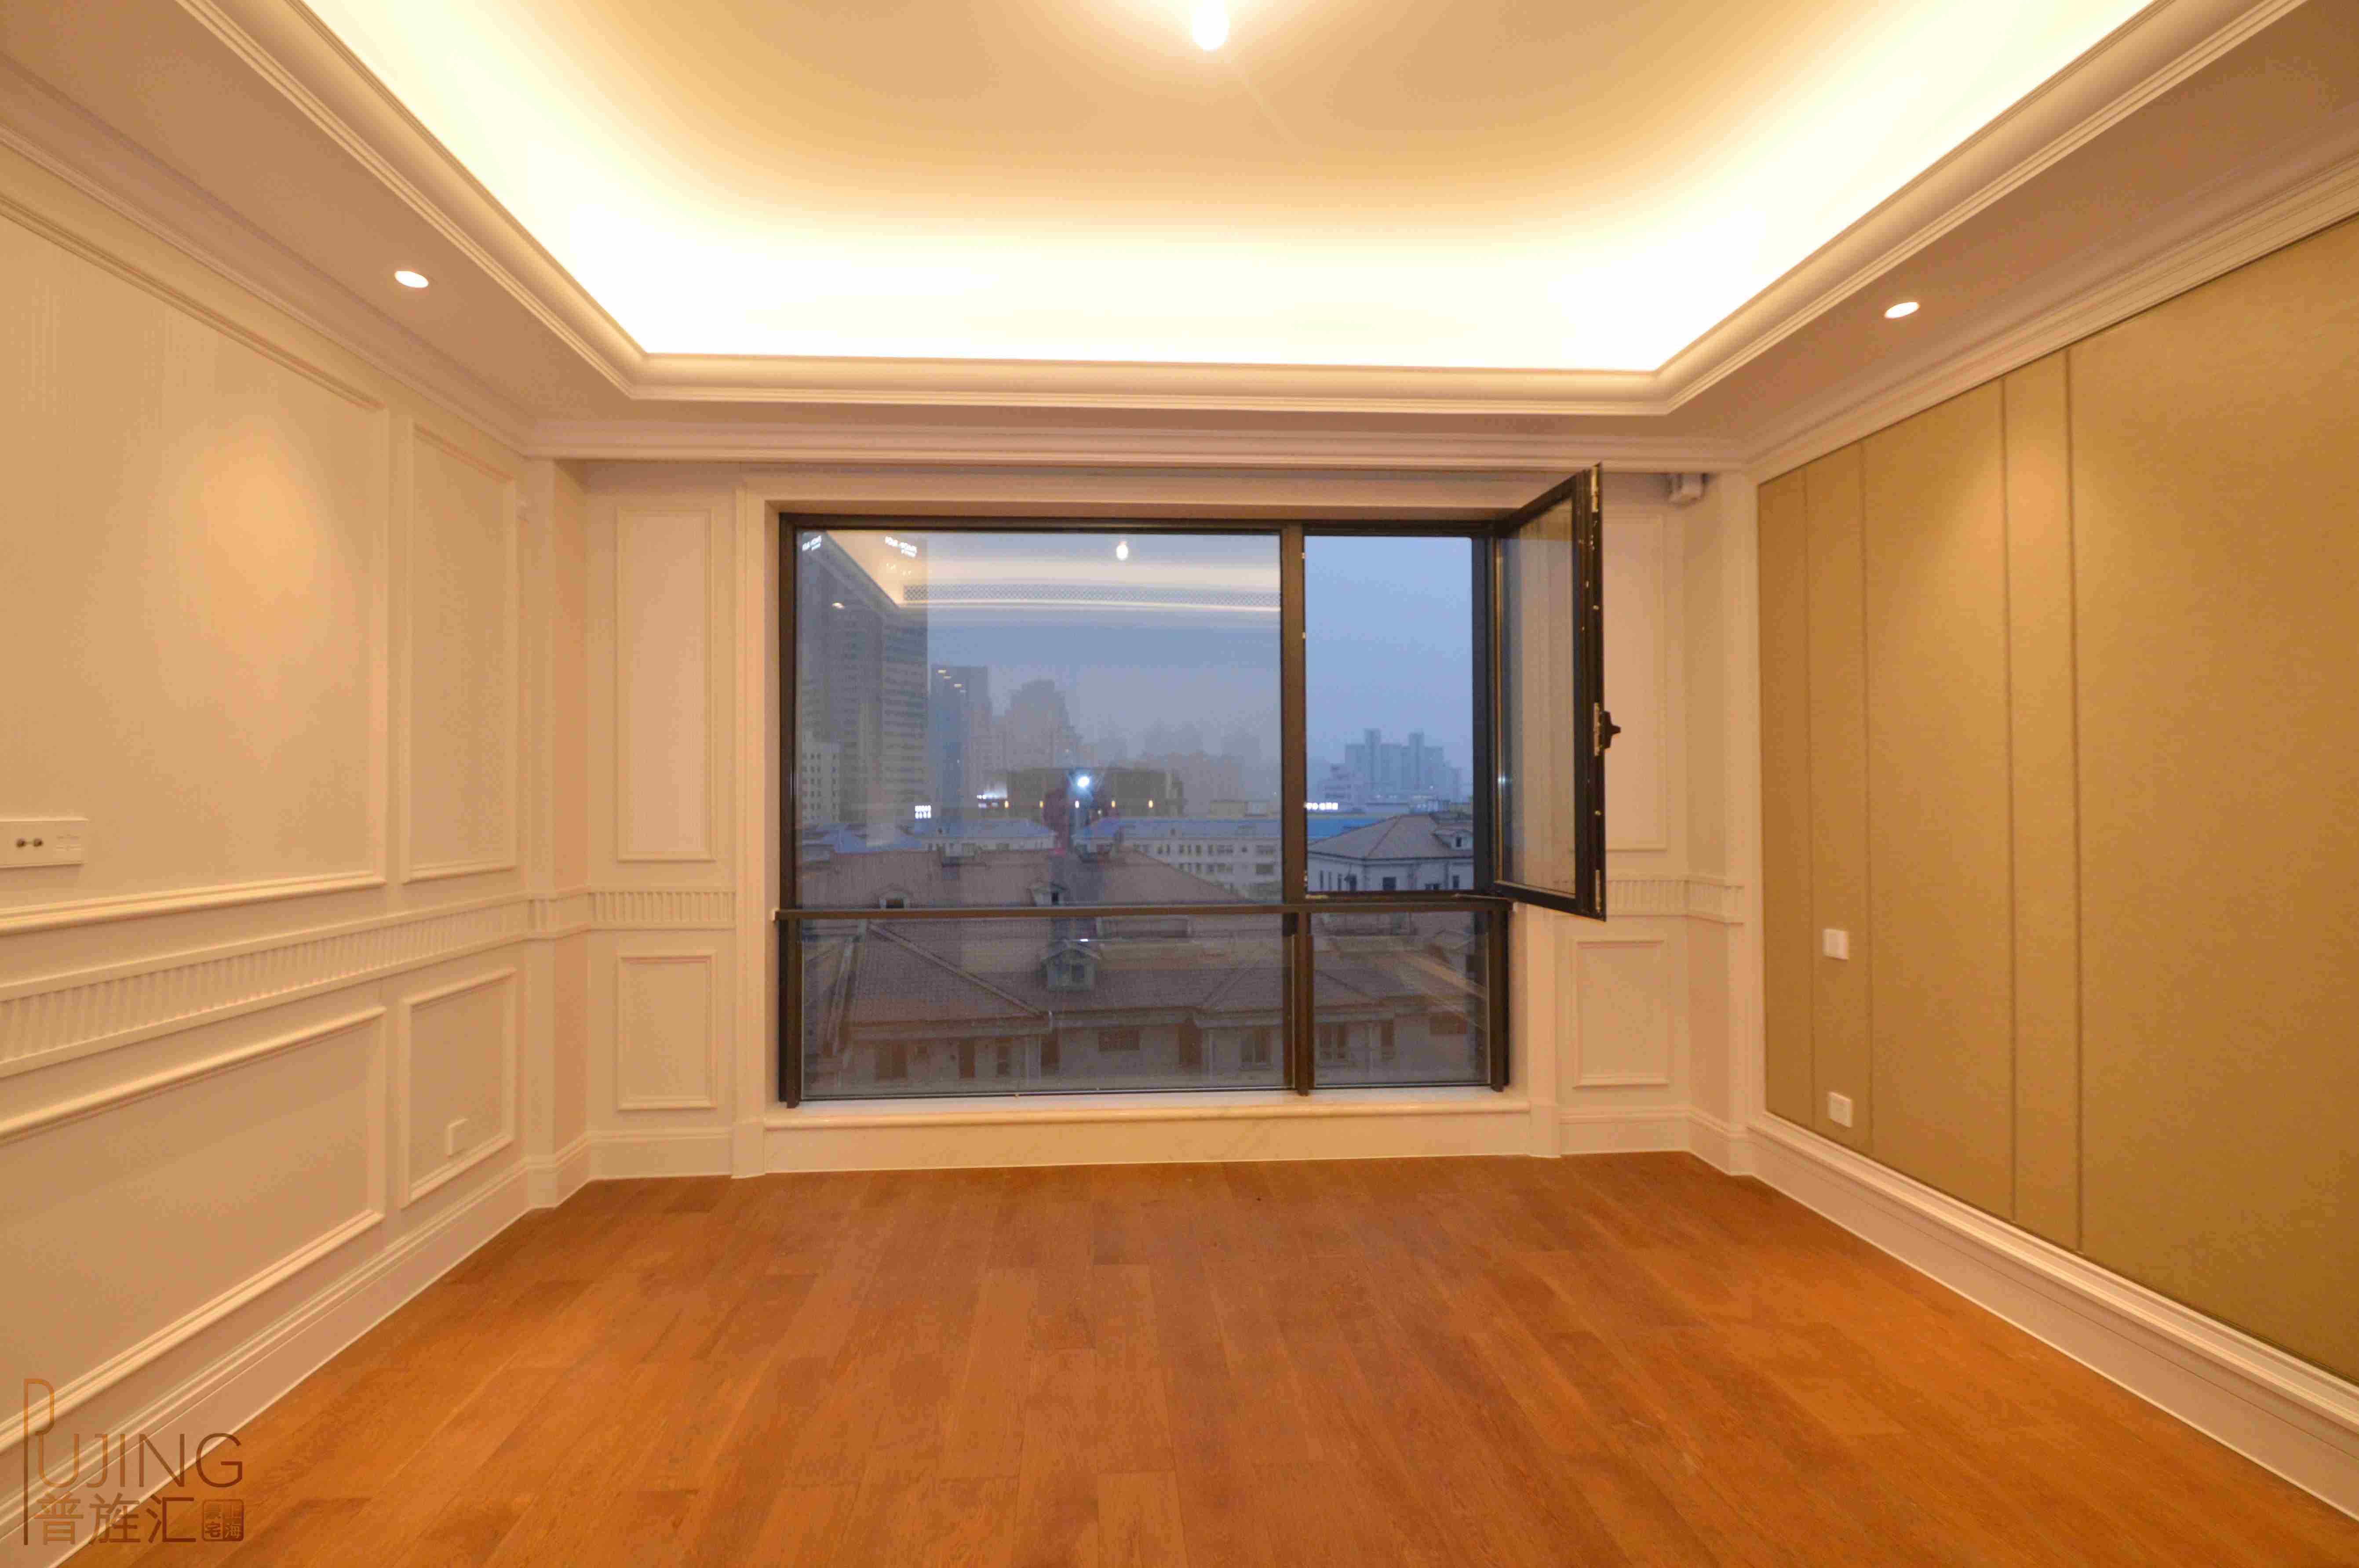  Luxurious 4BR Apartment for Rent in Pudong